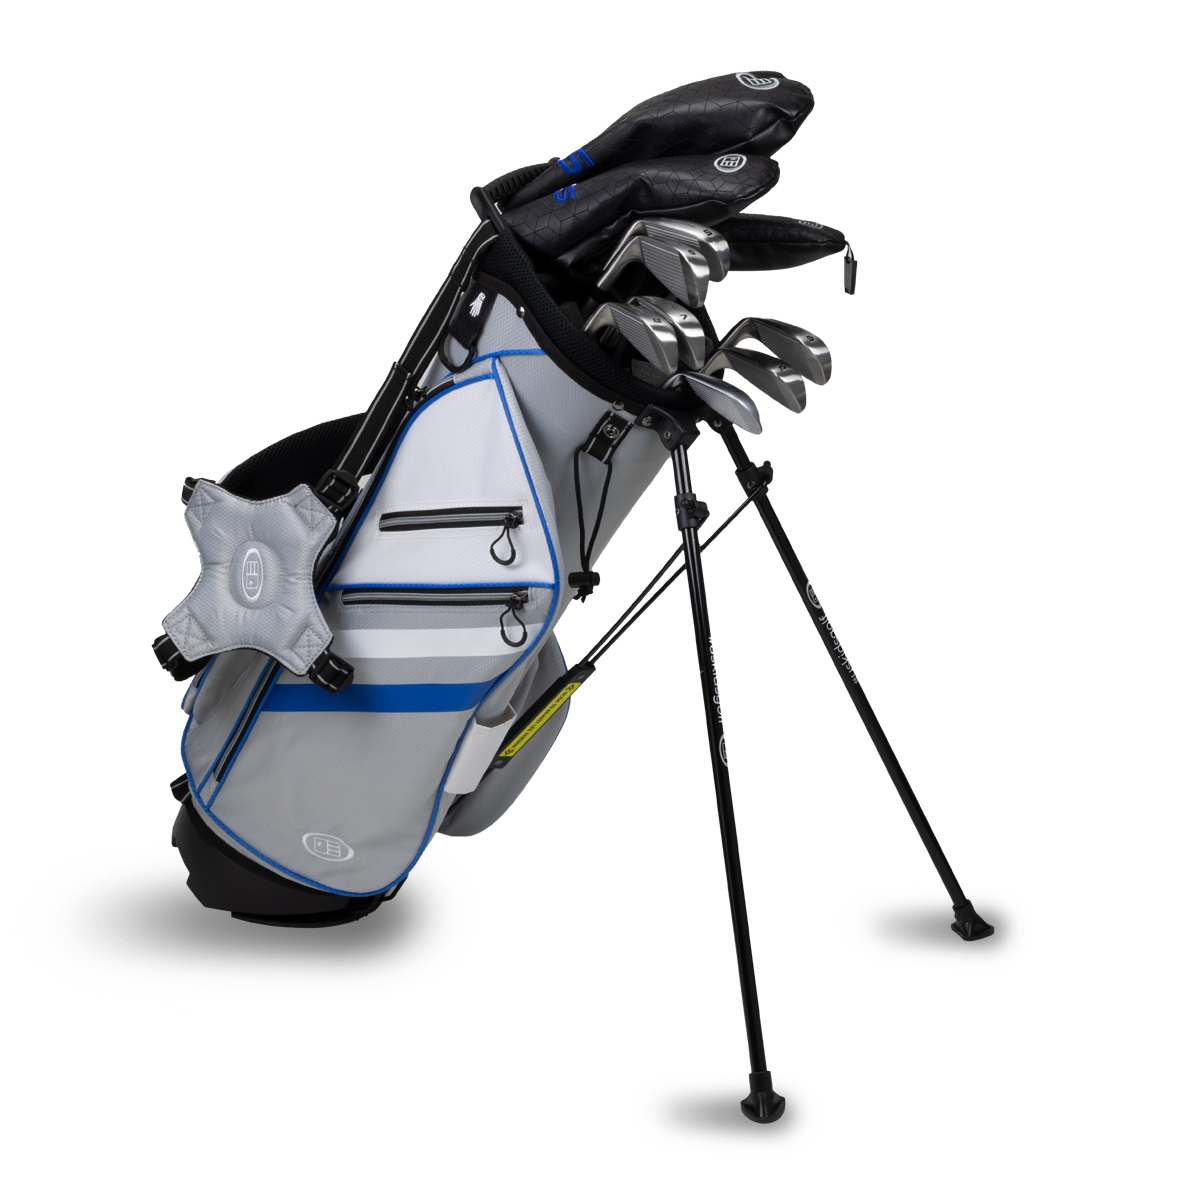 TS5-66  10 Club Stand Set Combo, Silver/White/Blue Bag